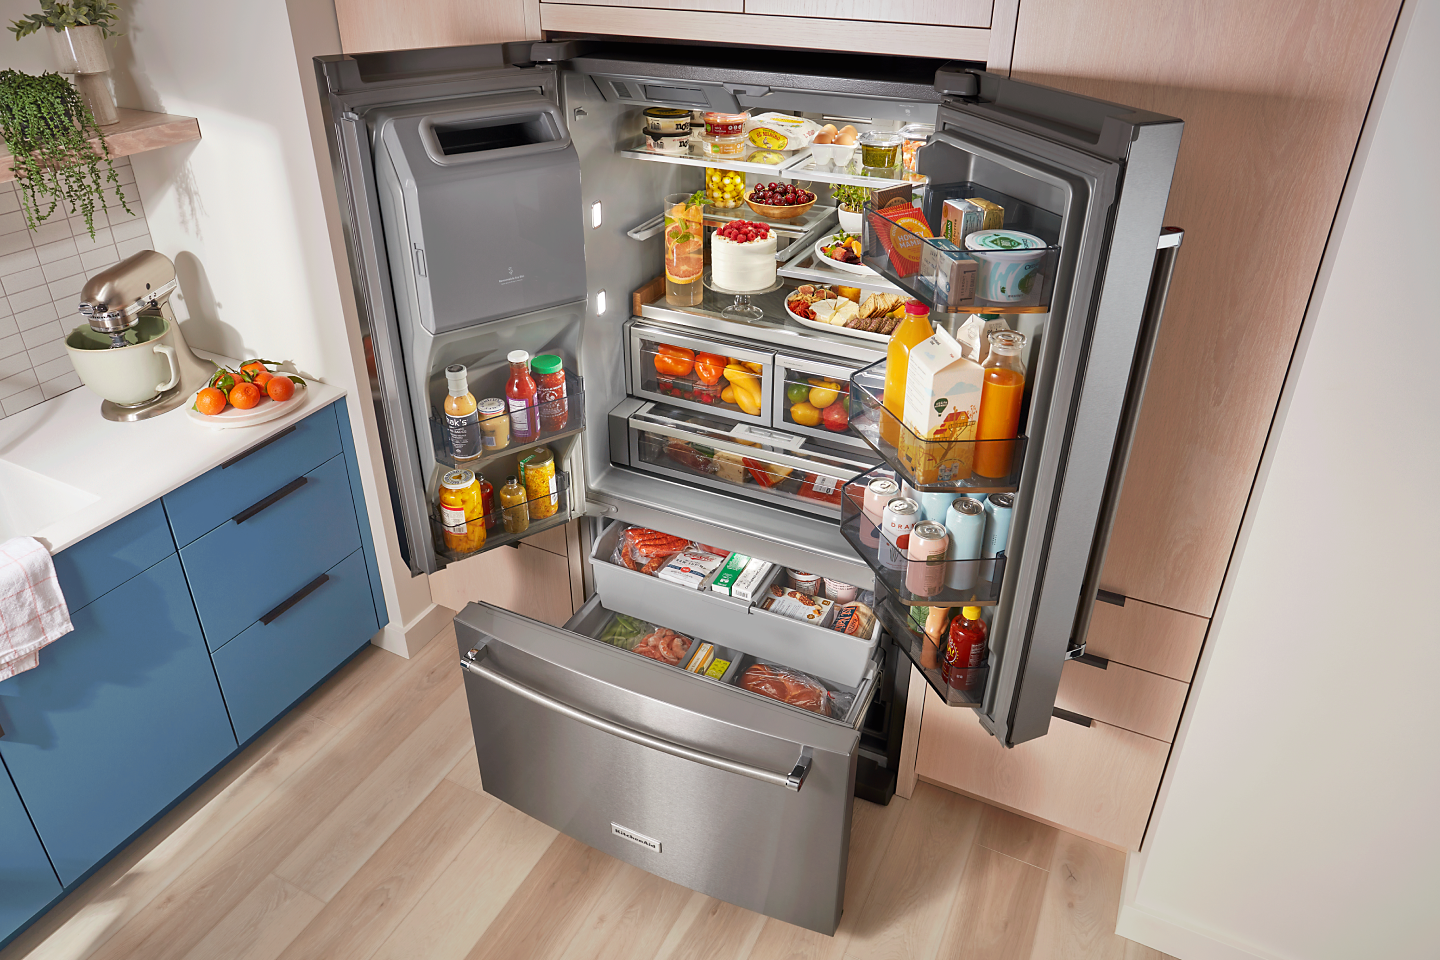 Open KitchenAid® French door refrigerator filled with fresh ingredients